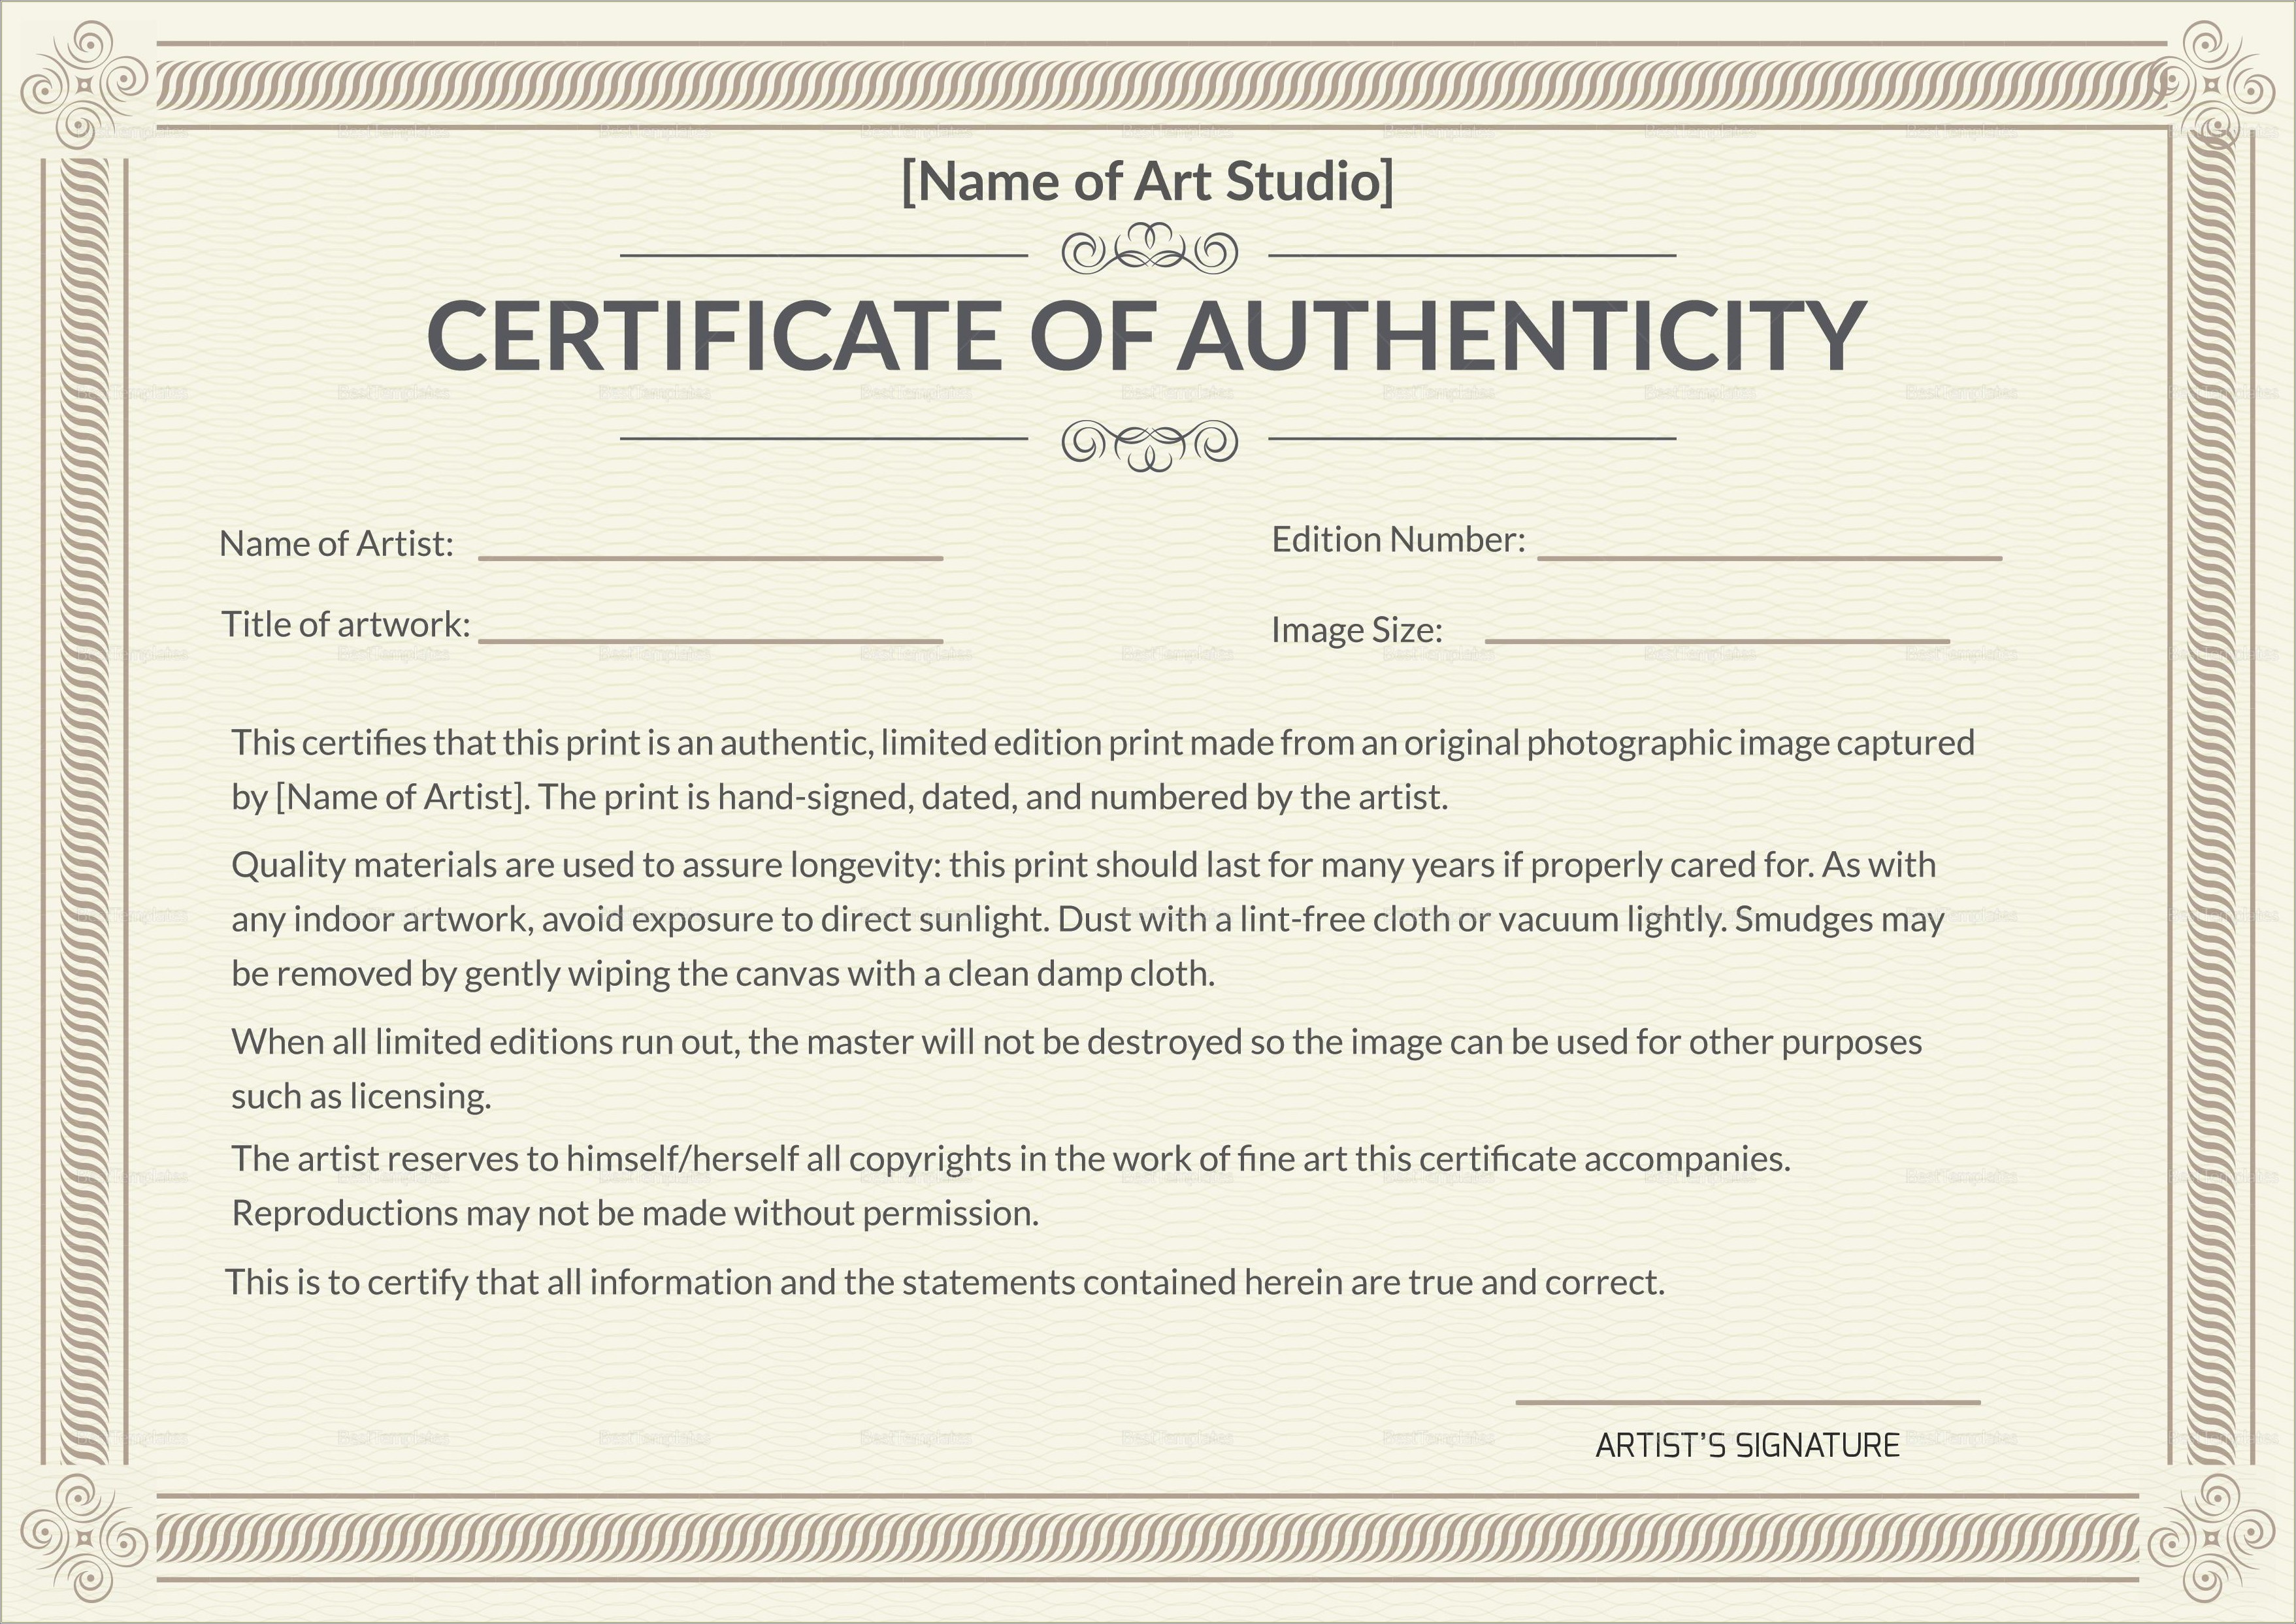 Certificate Of Authenticity Template Free For Artwork